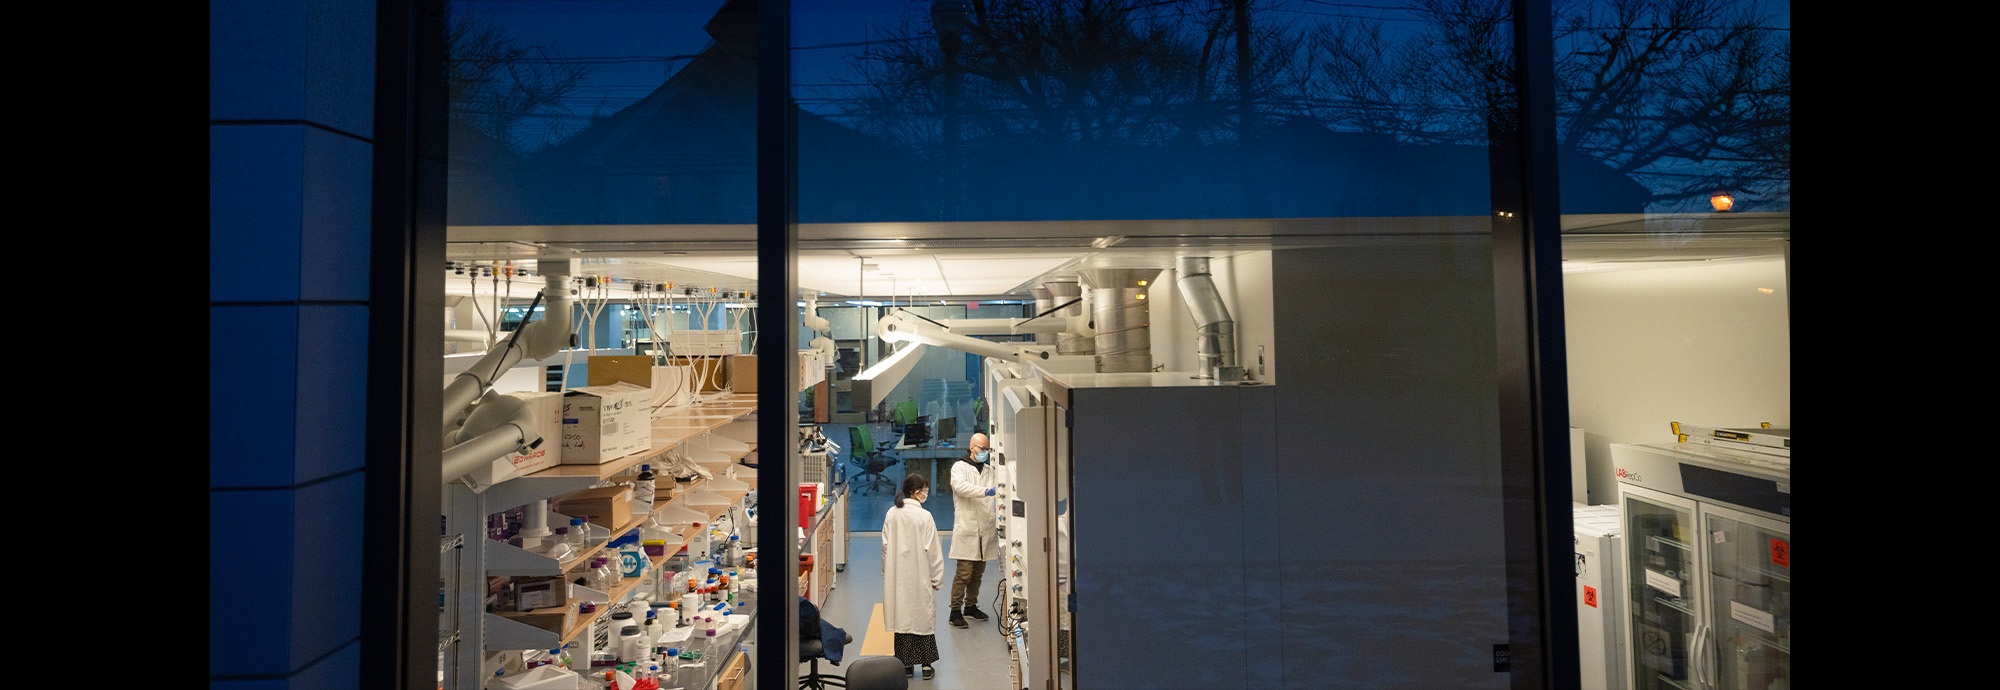 External of building looking through a window to two people working in a lab